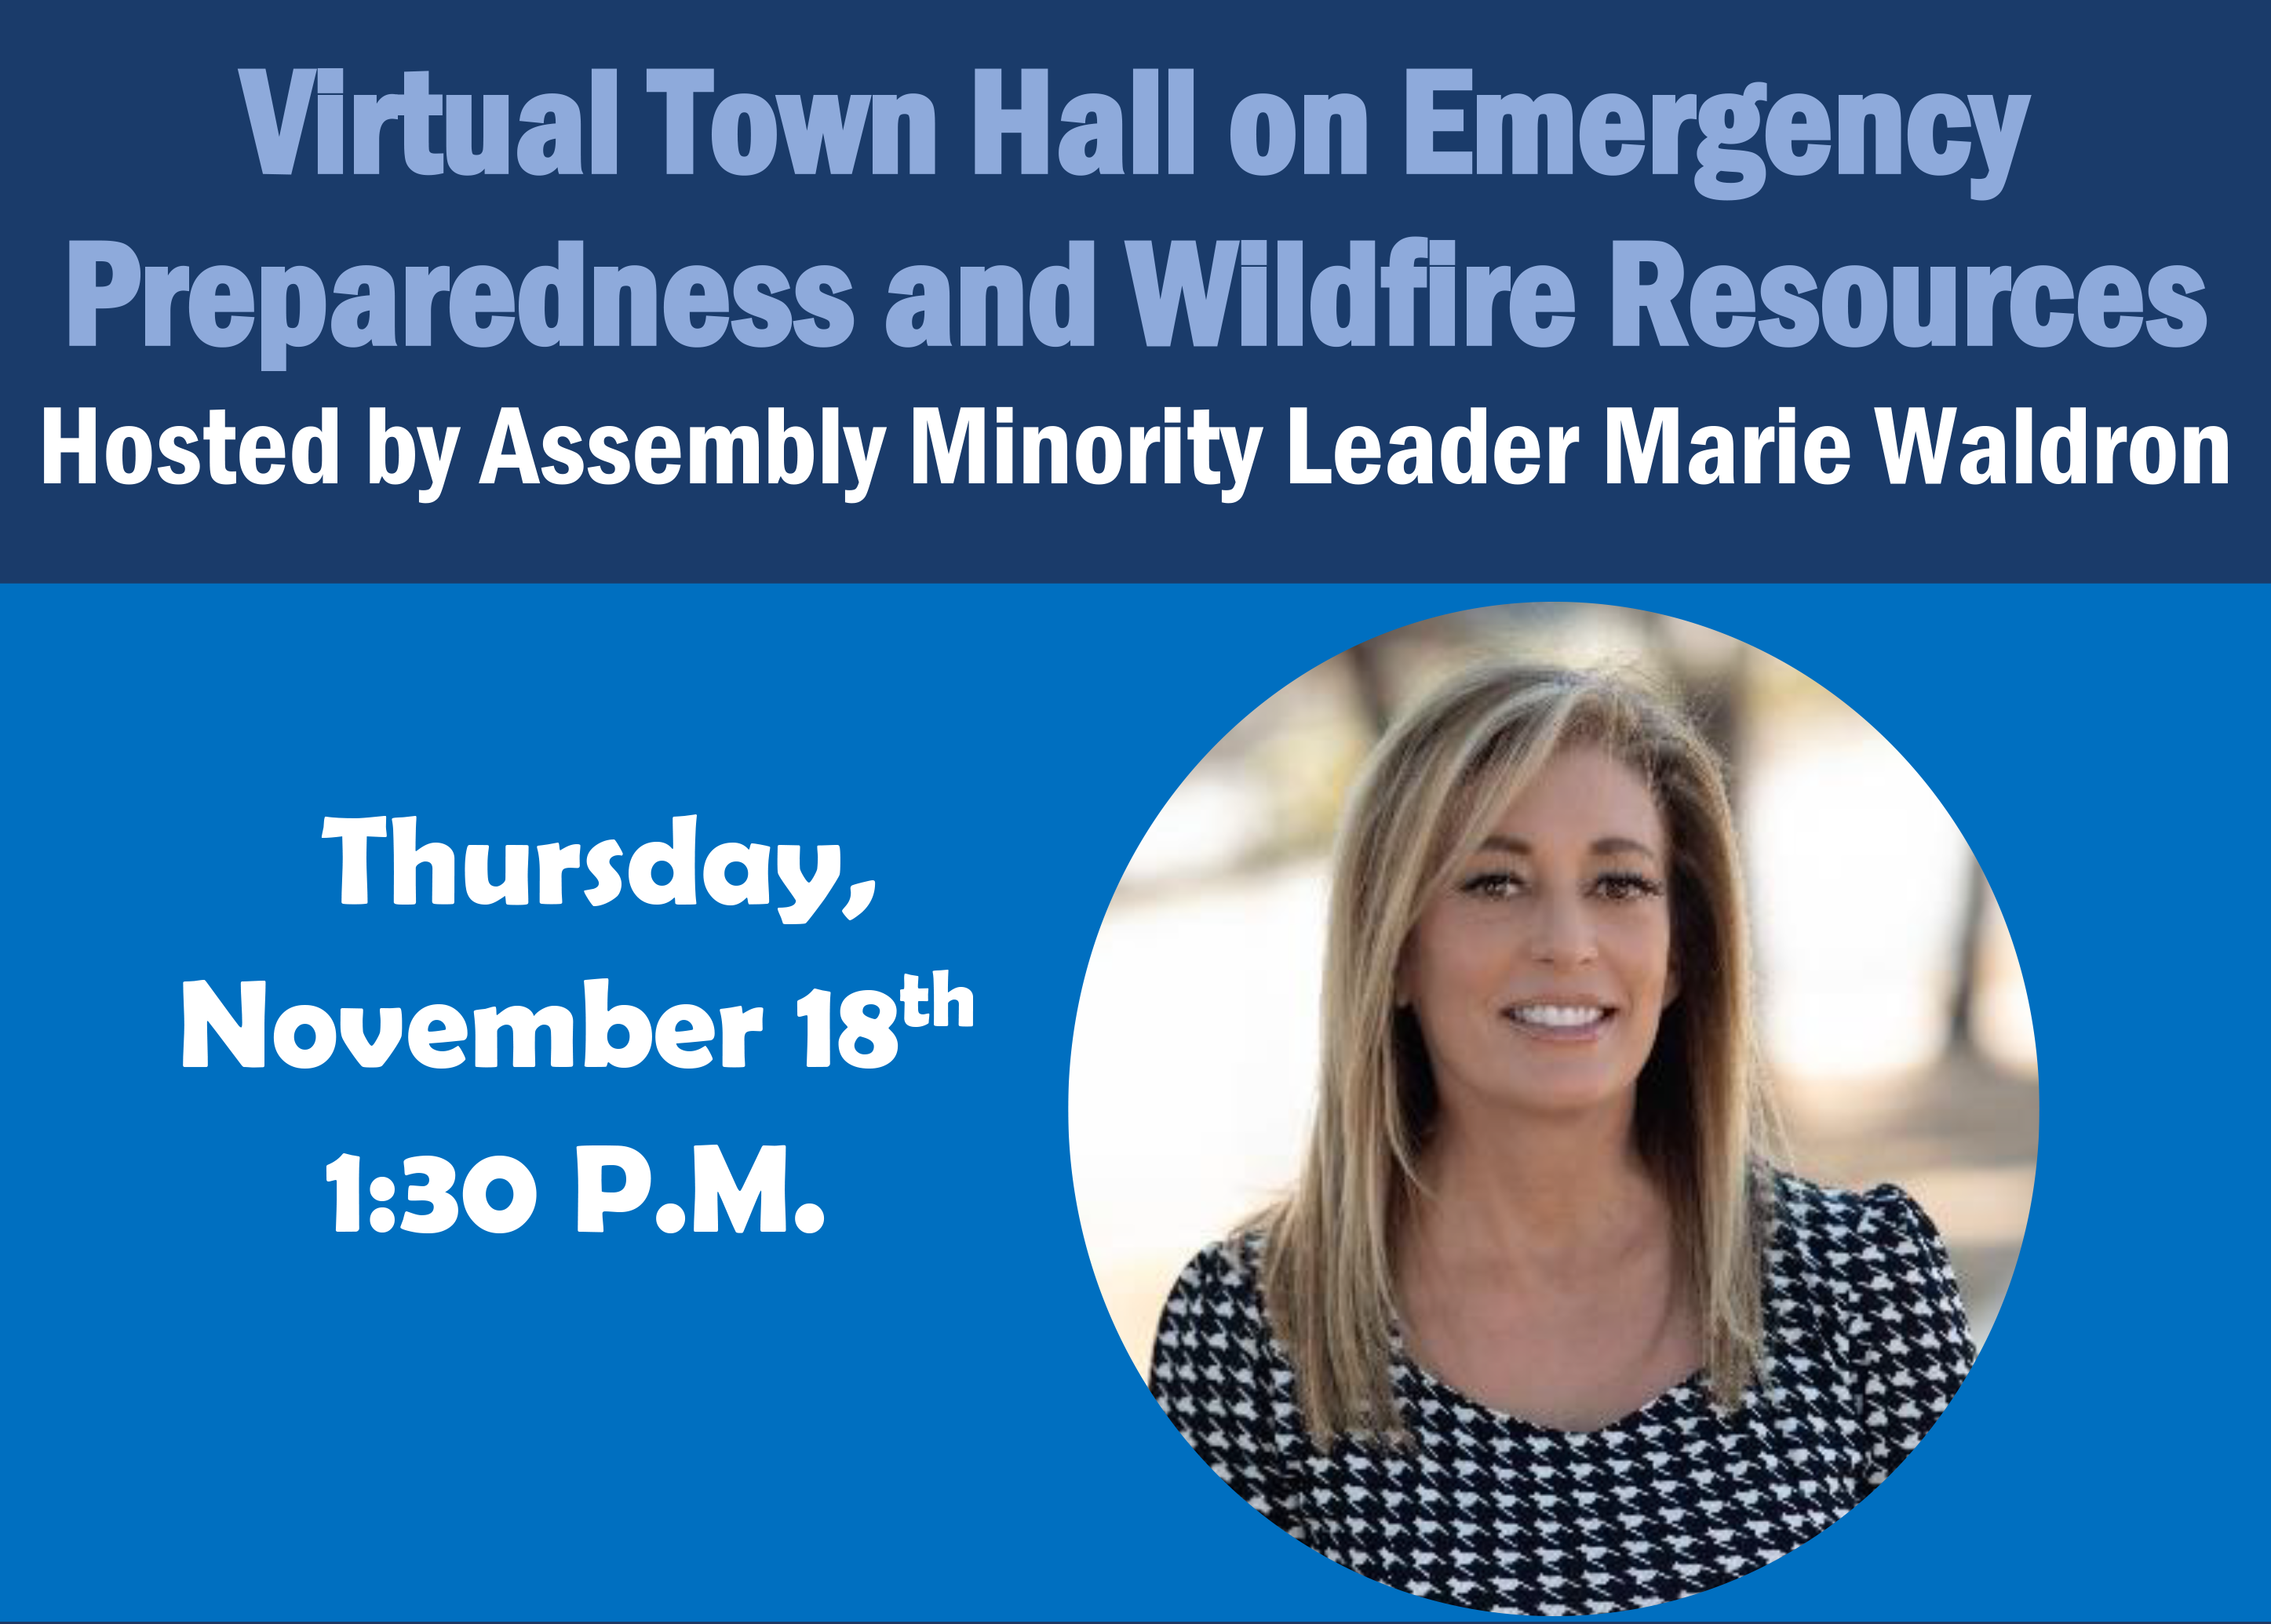 Virtual Town Hall on Emergency Preparedness and Wildfire Resources Hosted by Assembly Minority Leader Marie Waldron  Thursday, November 18th 1:30 P.M. 